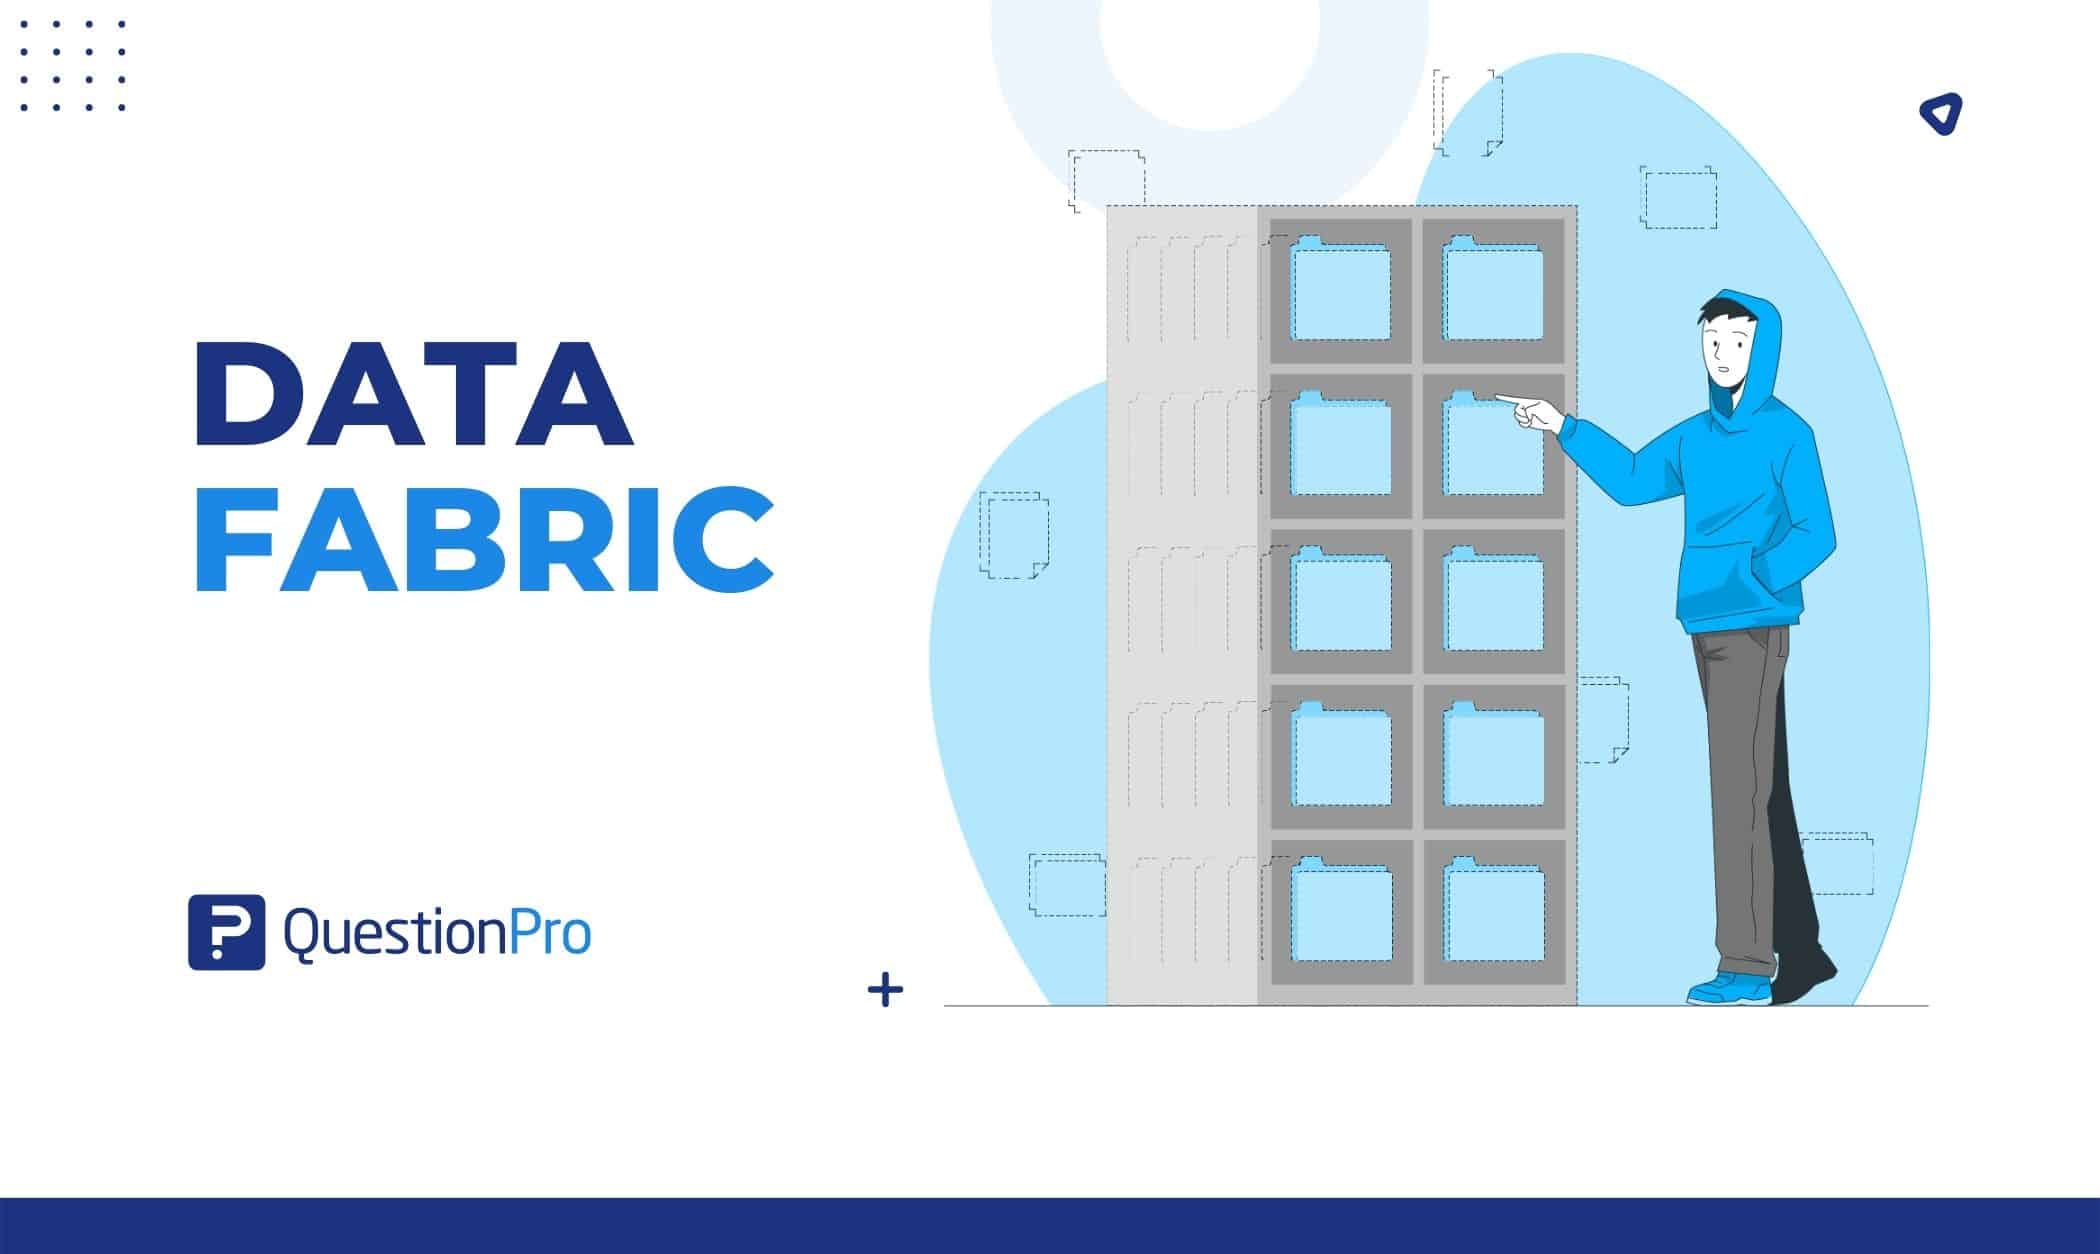 Data fabric is an evolving method of managing data that replaces point-to-point connections with a network-based architecture.